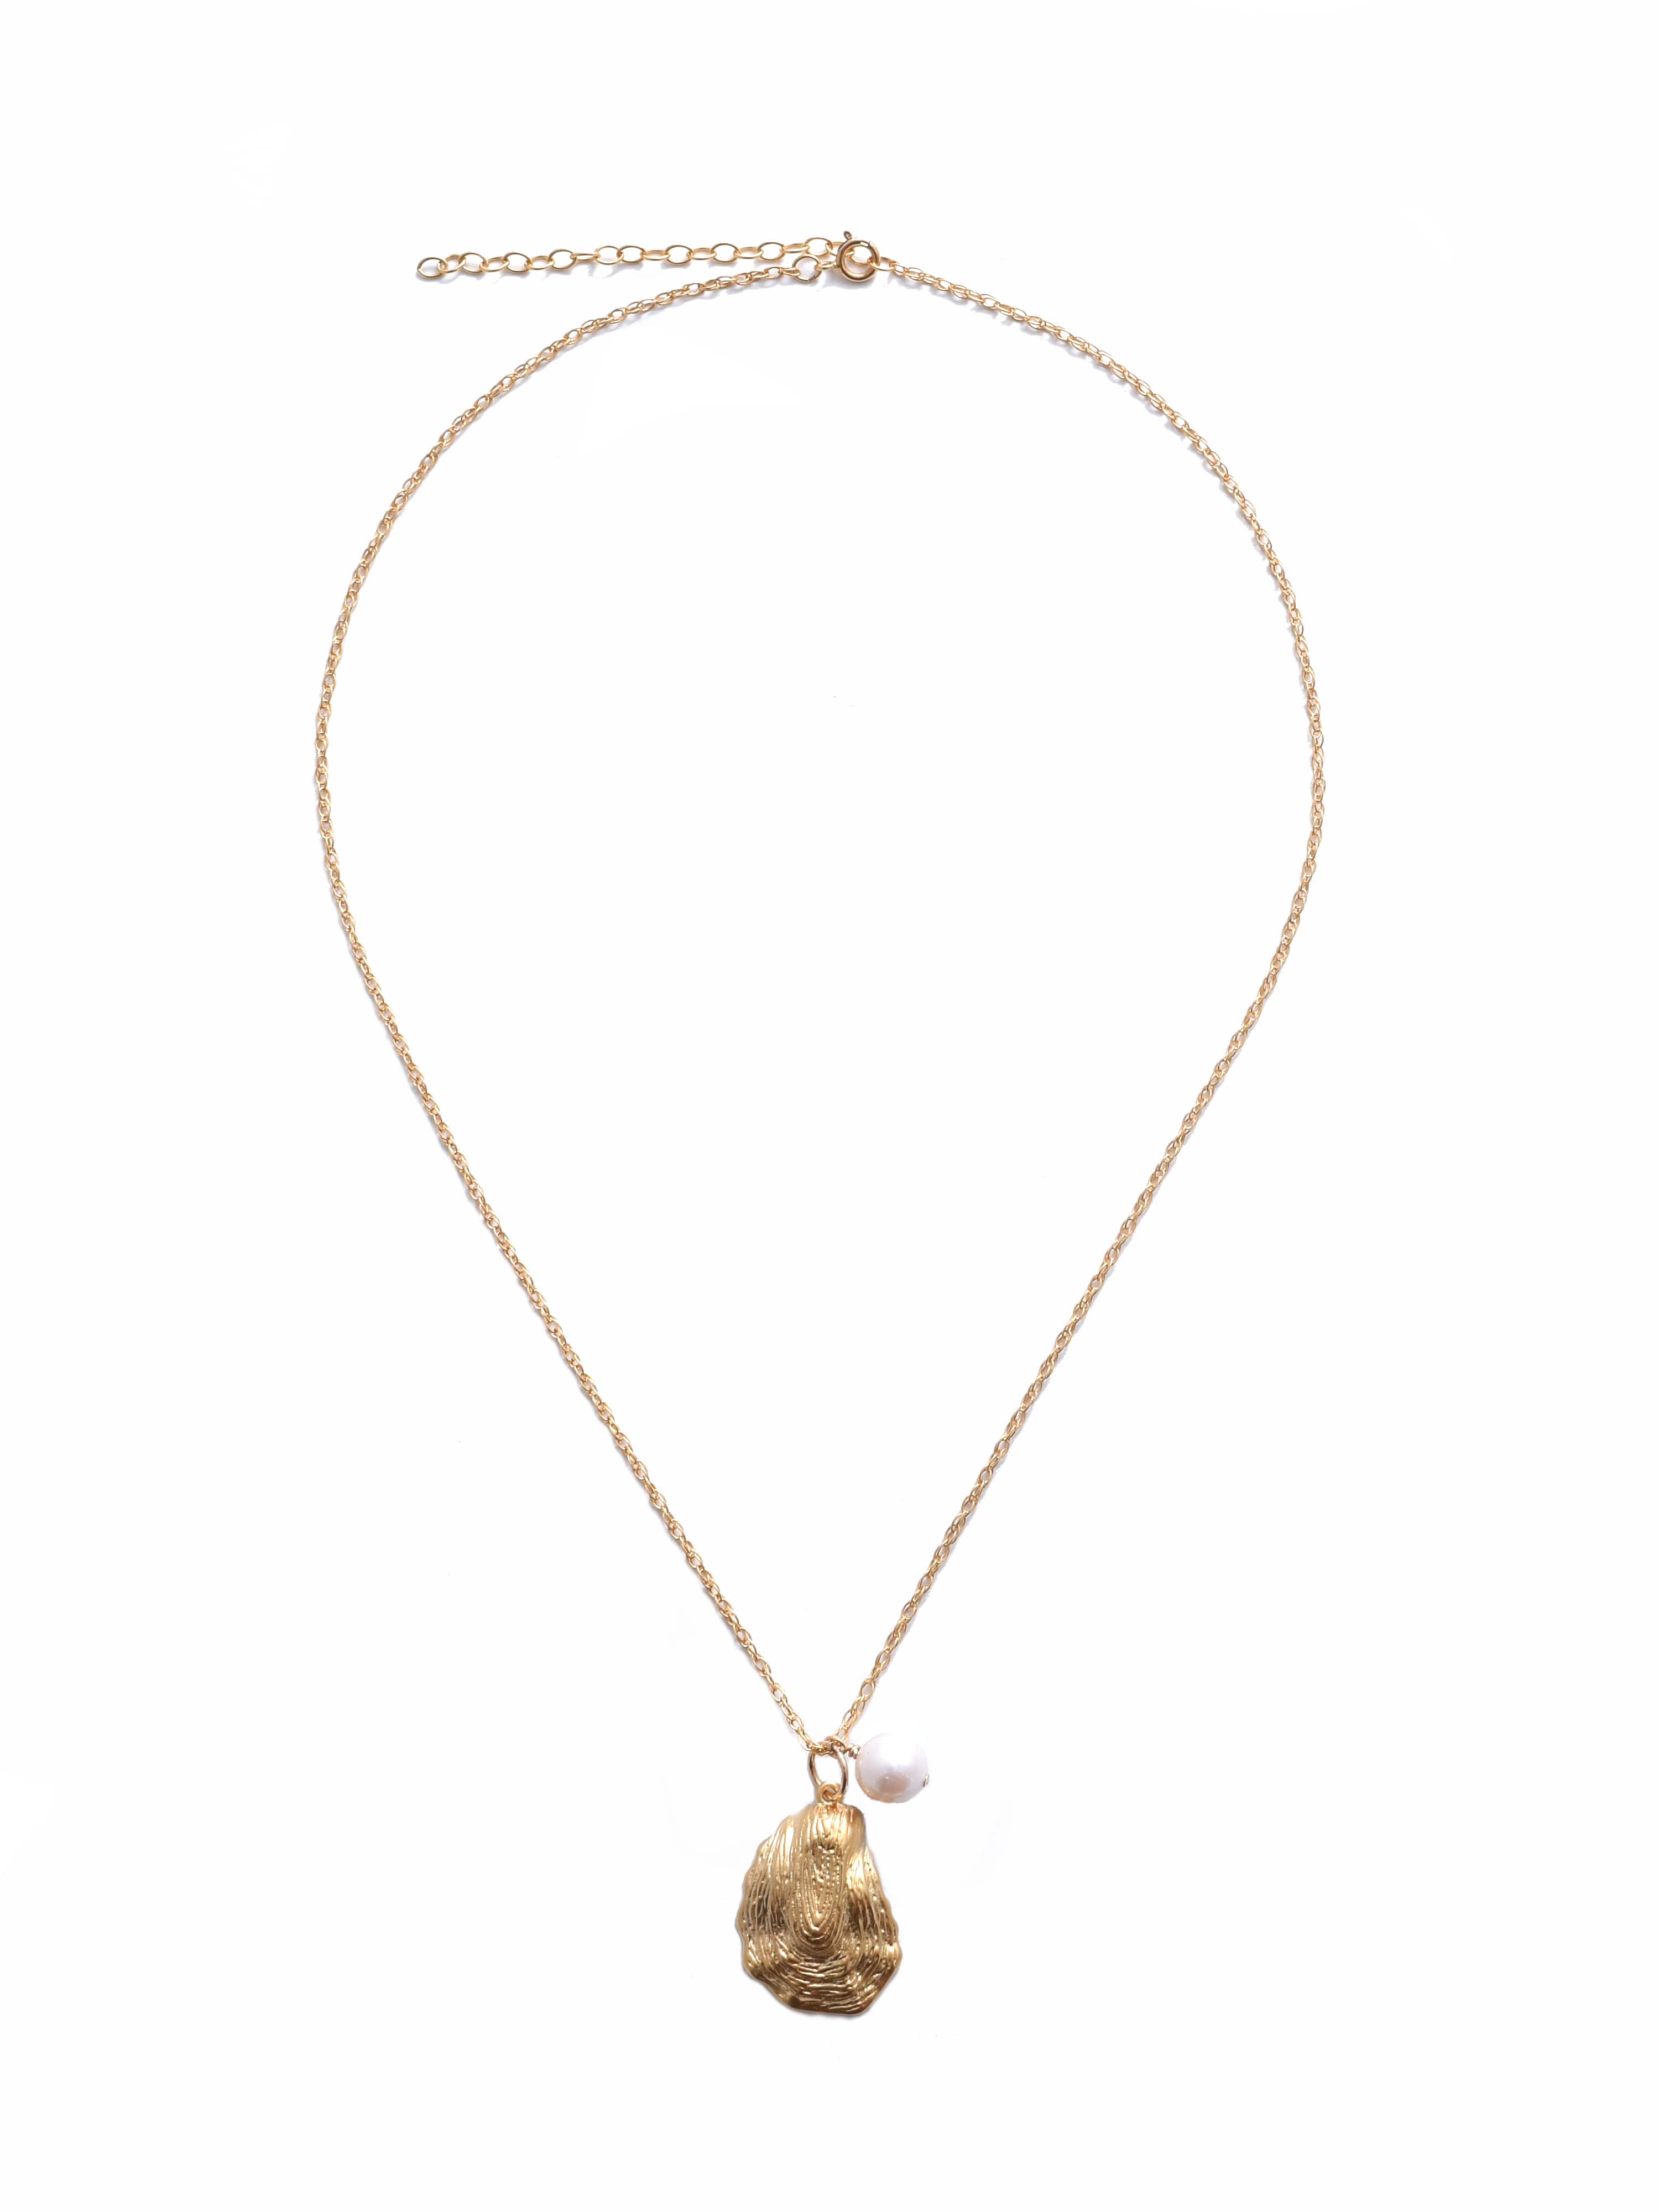 Shem Necklace in Gold